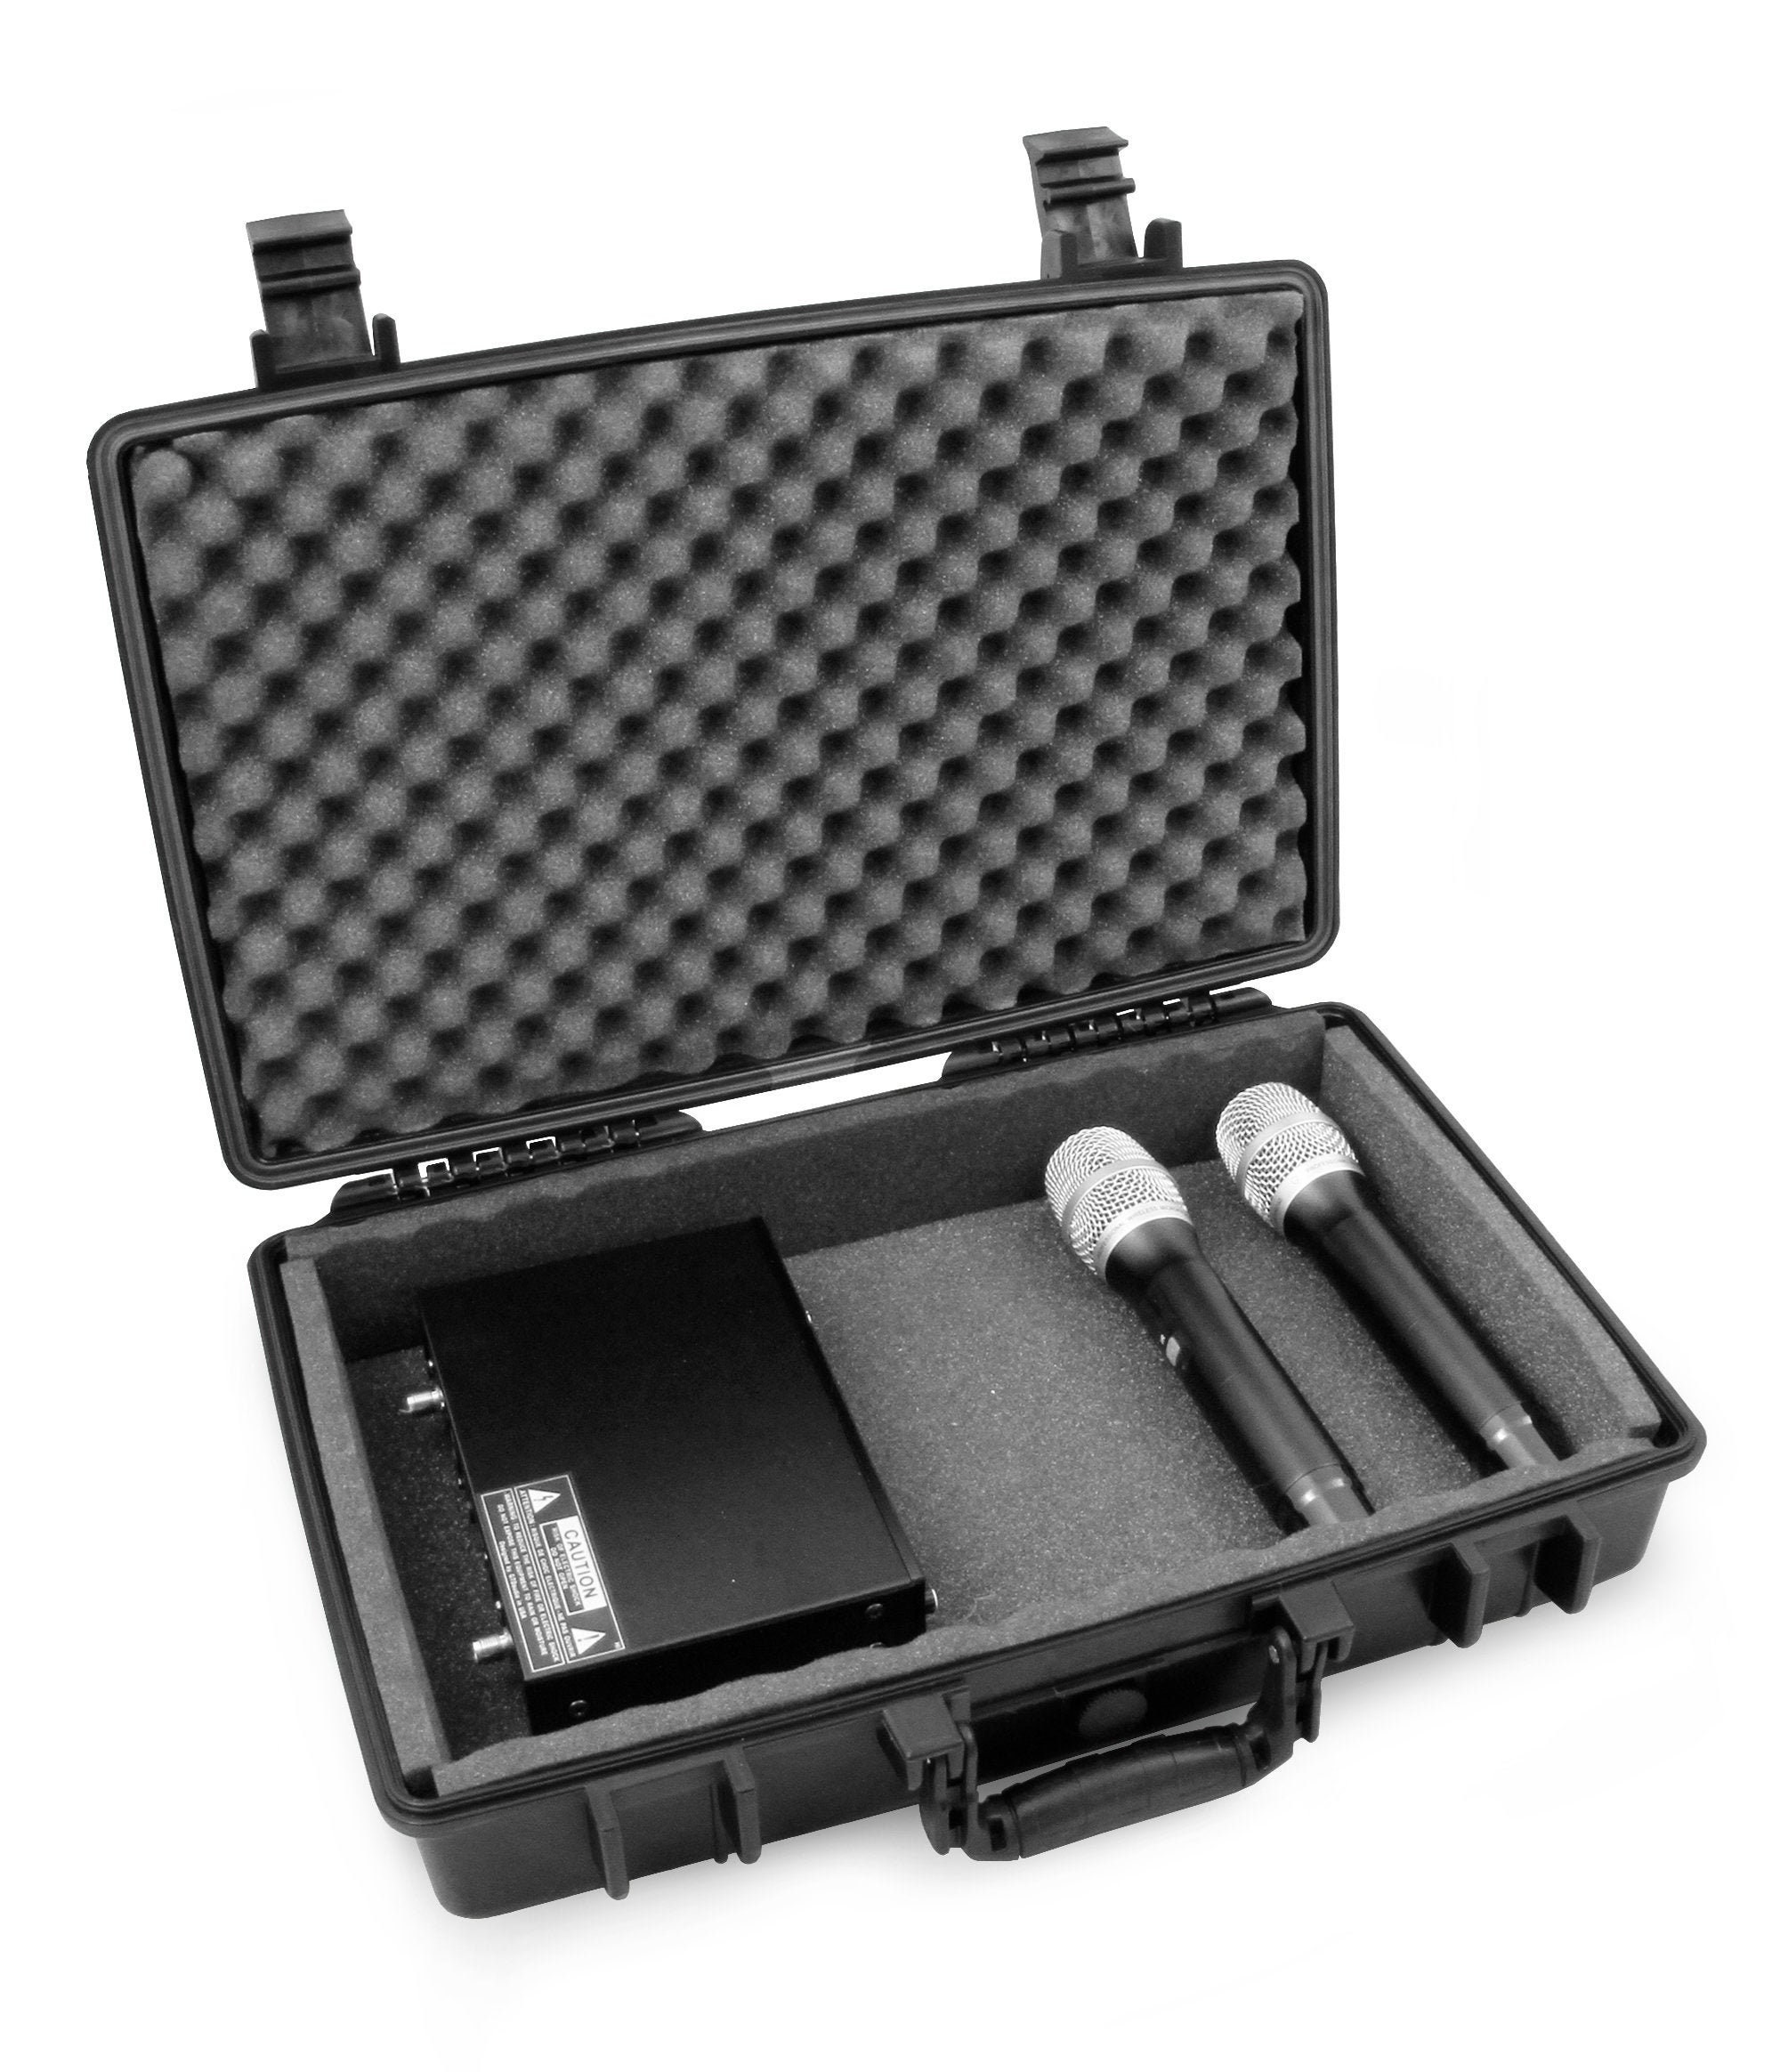 LEKATO Wireless Lavalier Microphone w/ Charging Case for iPhone iPad A